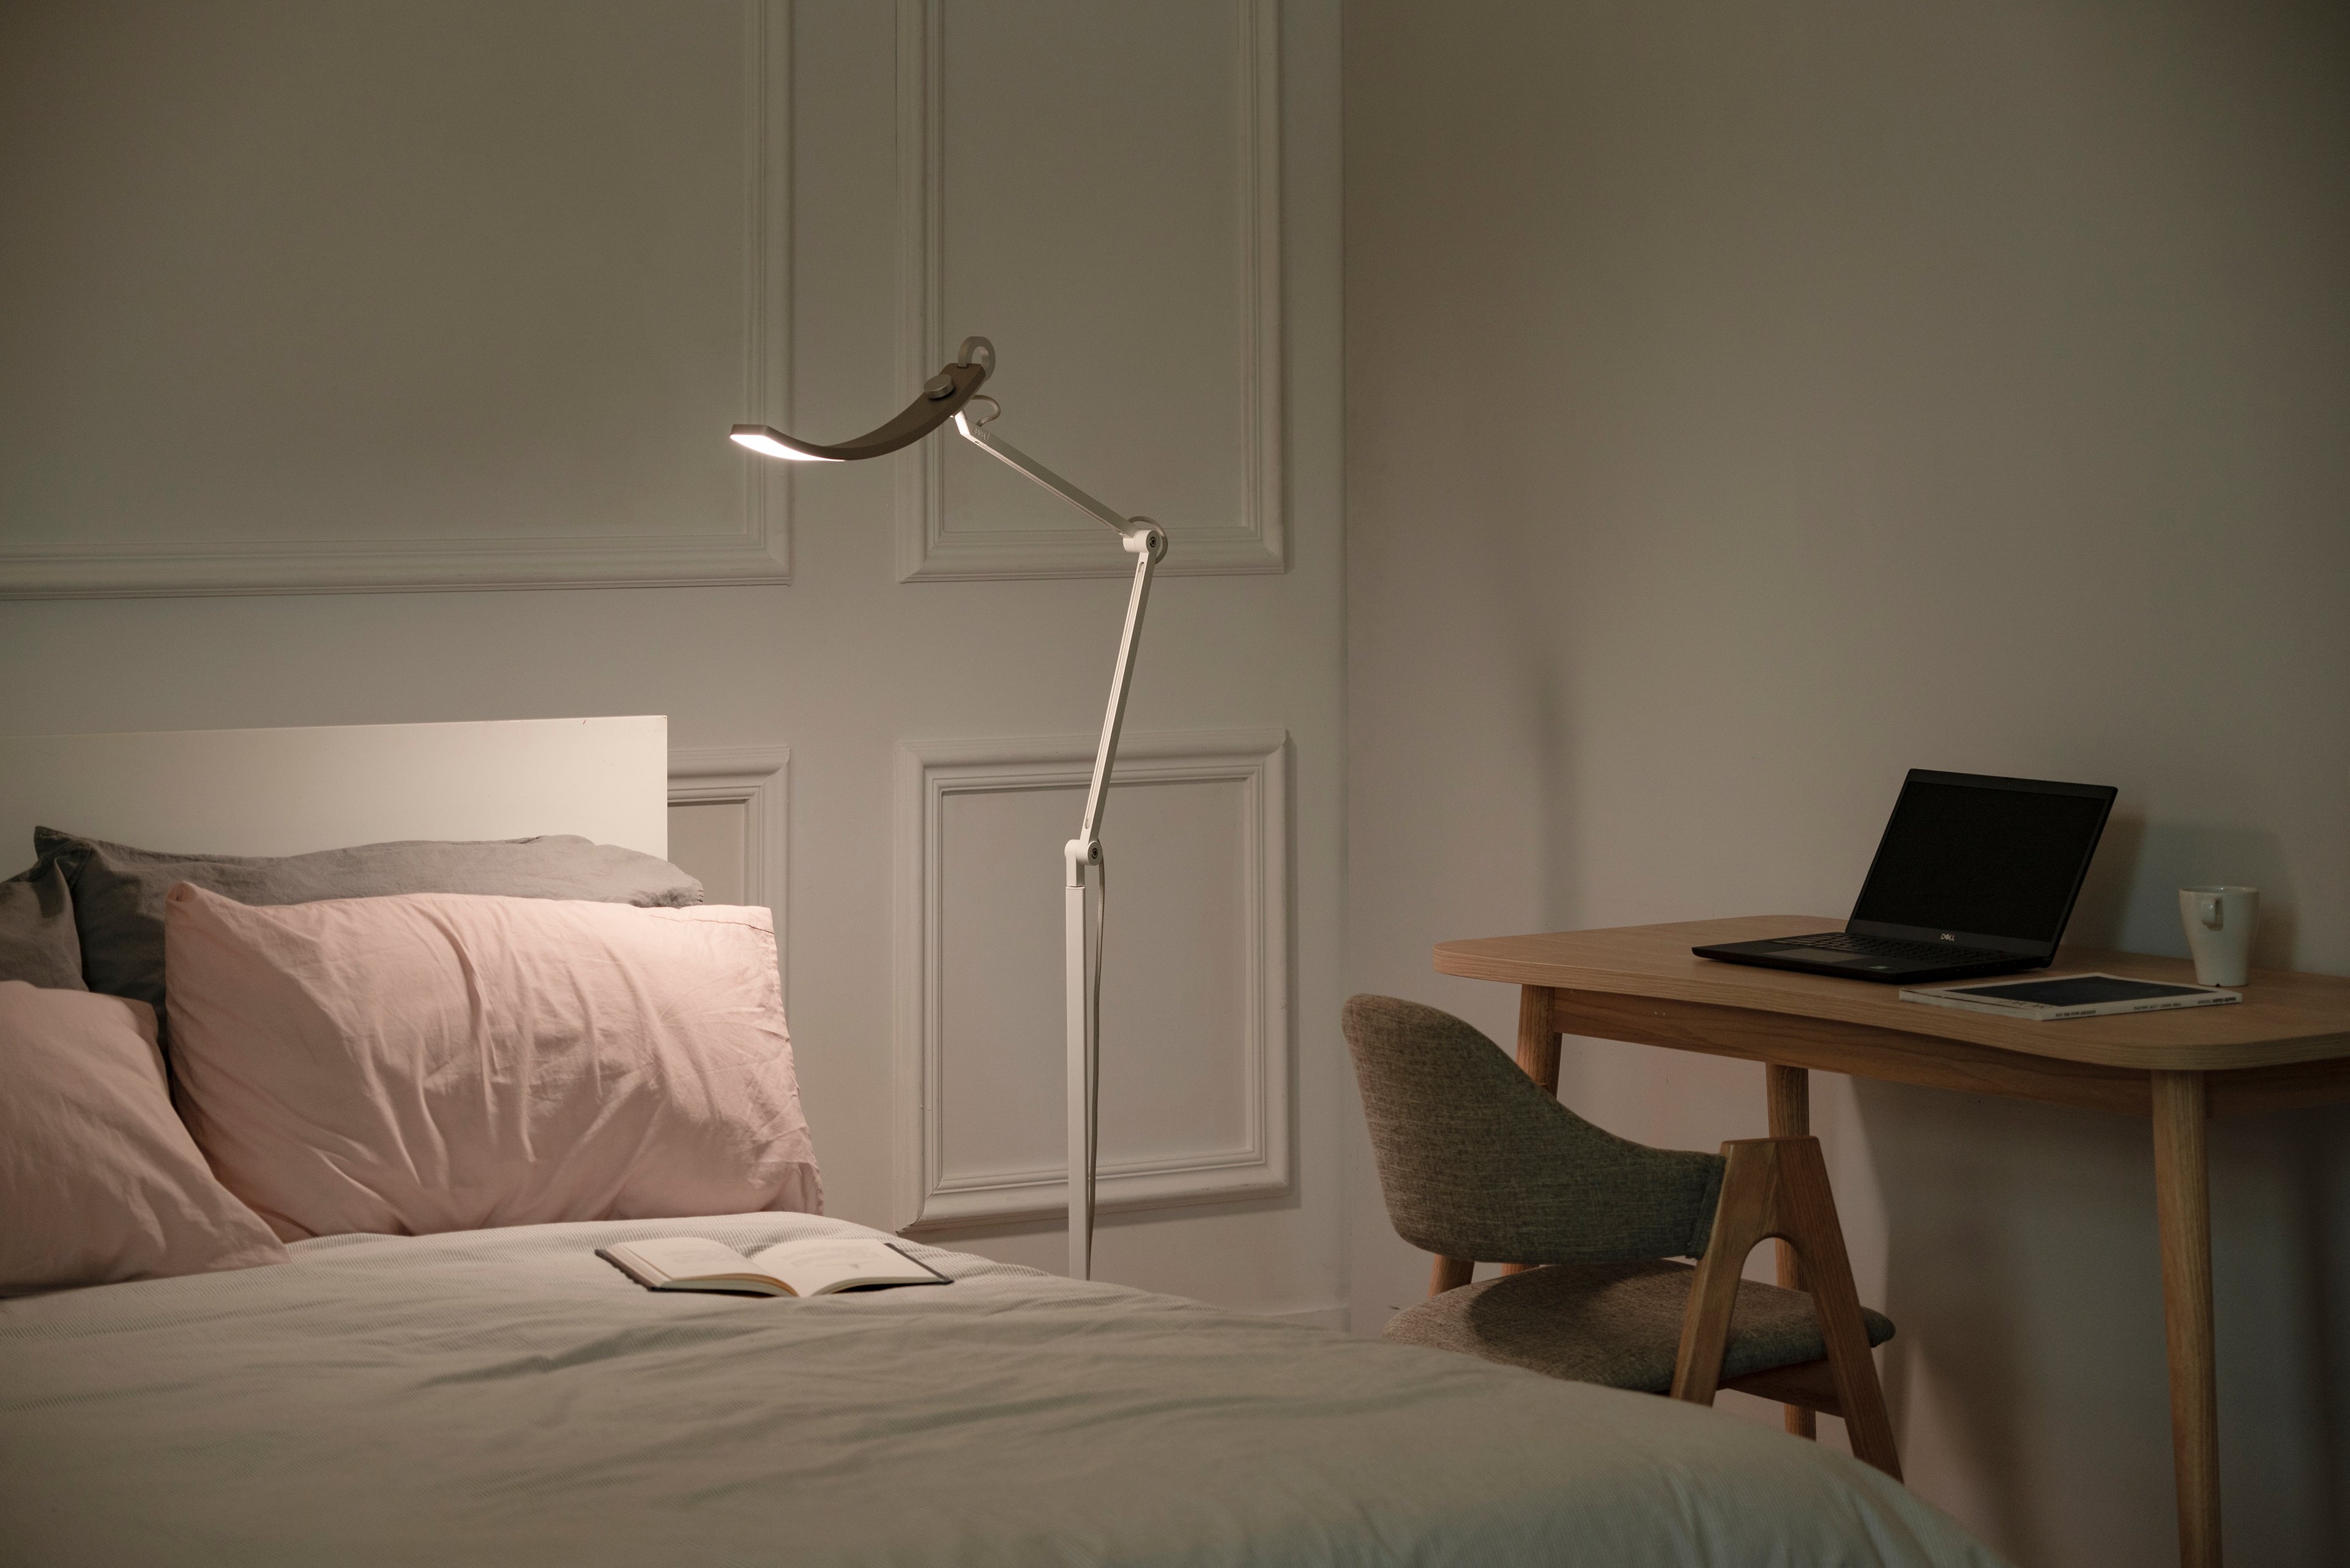 floor lamp for bedside reading with a desk  on right hand side